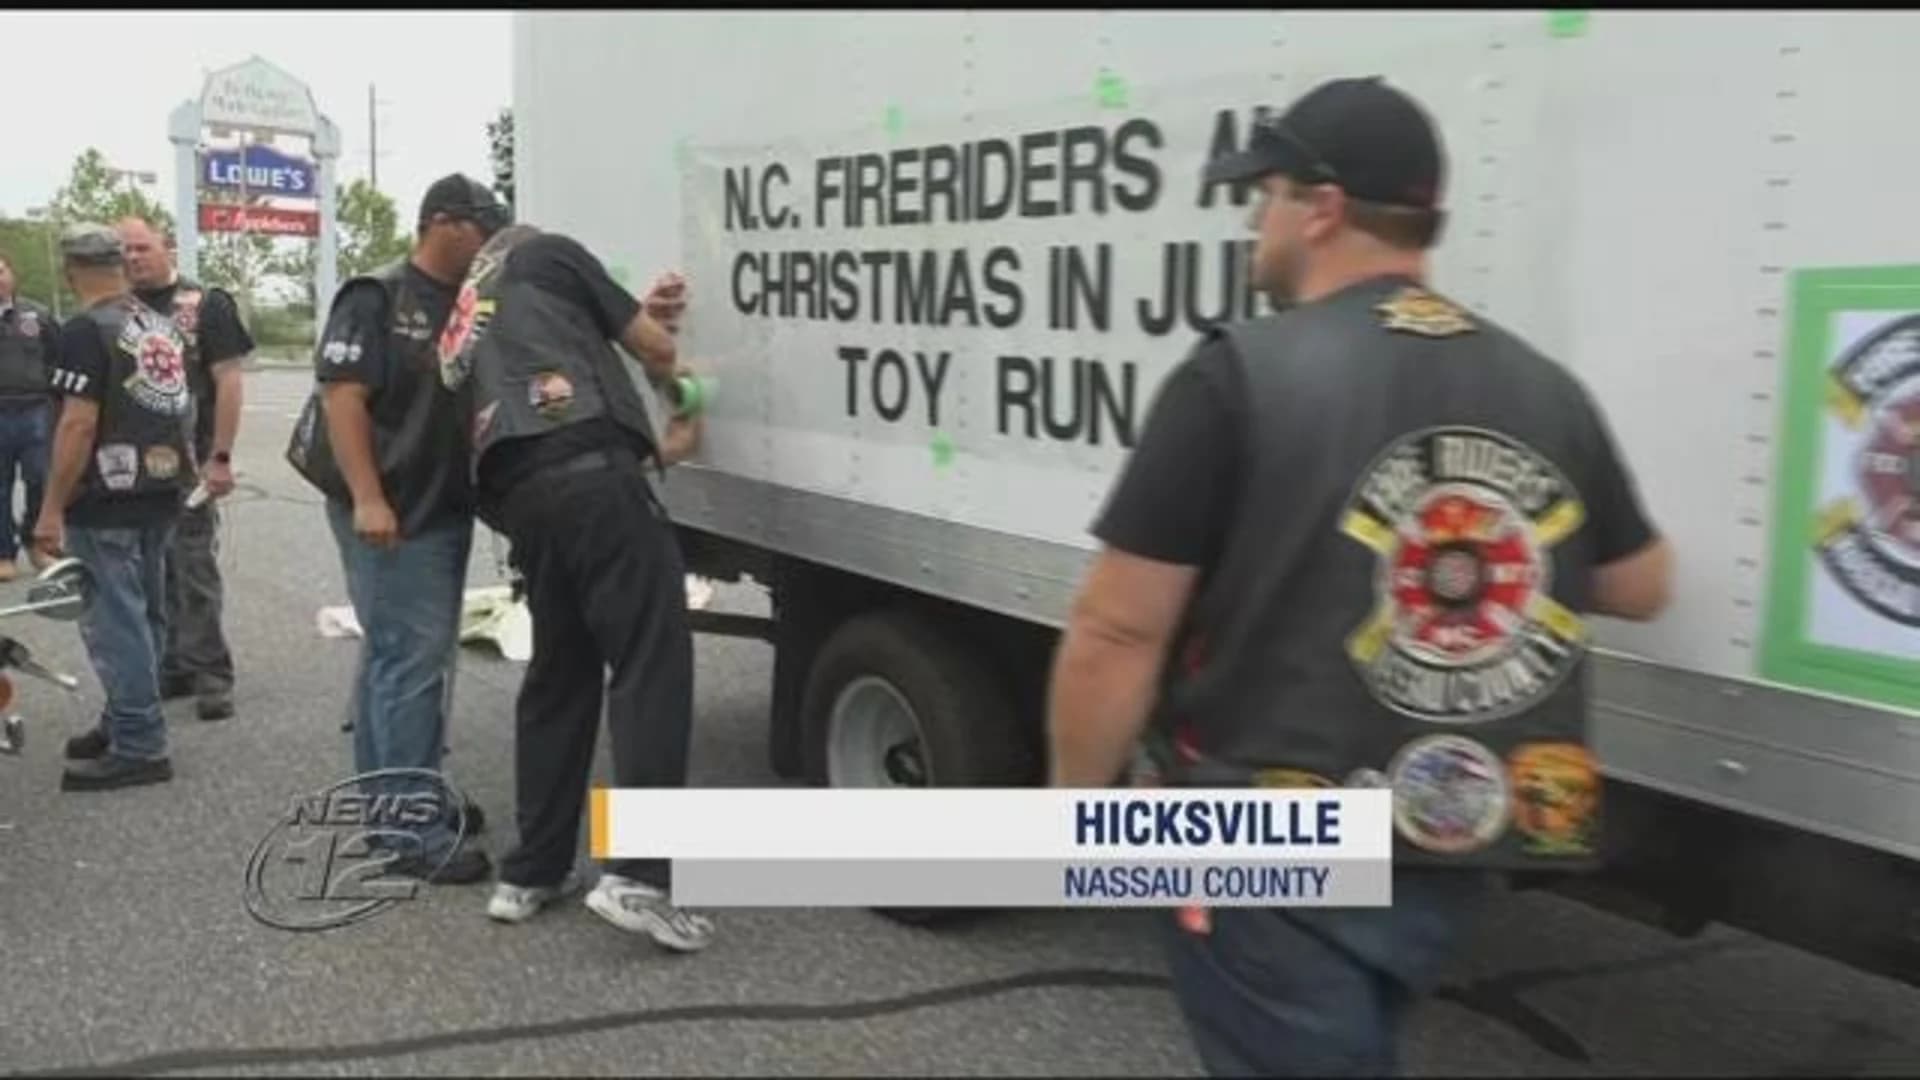 Motorcycle ride brings 'Christmas in June' to kids with special needs